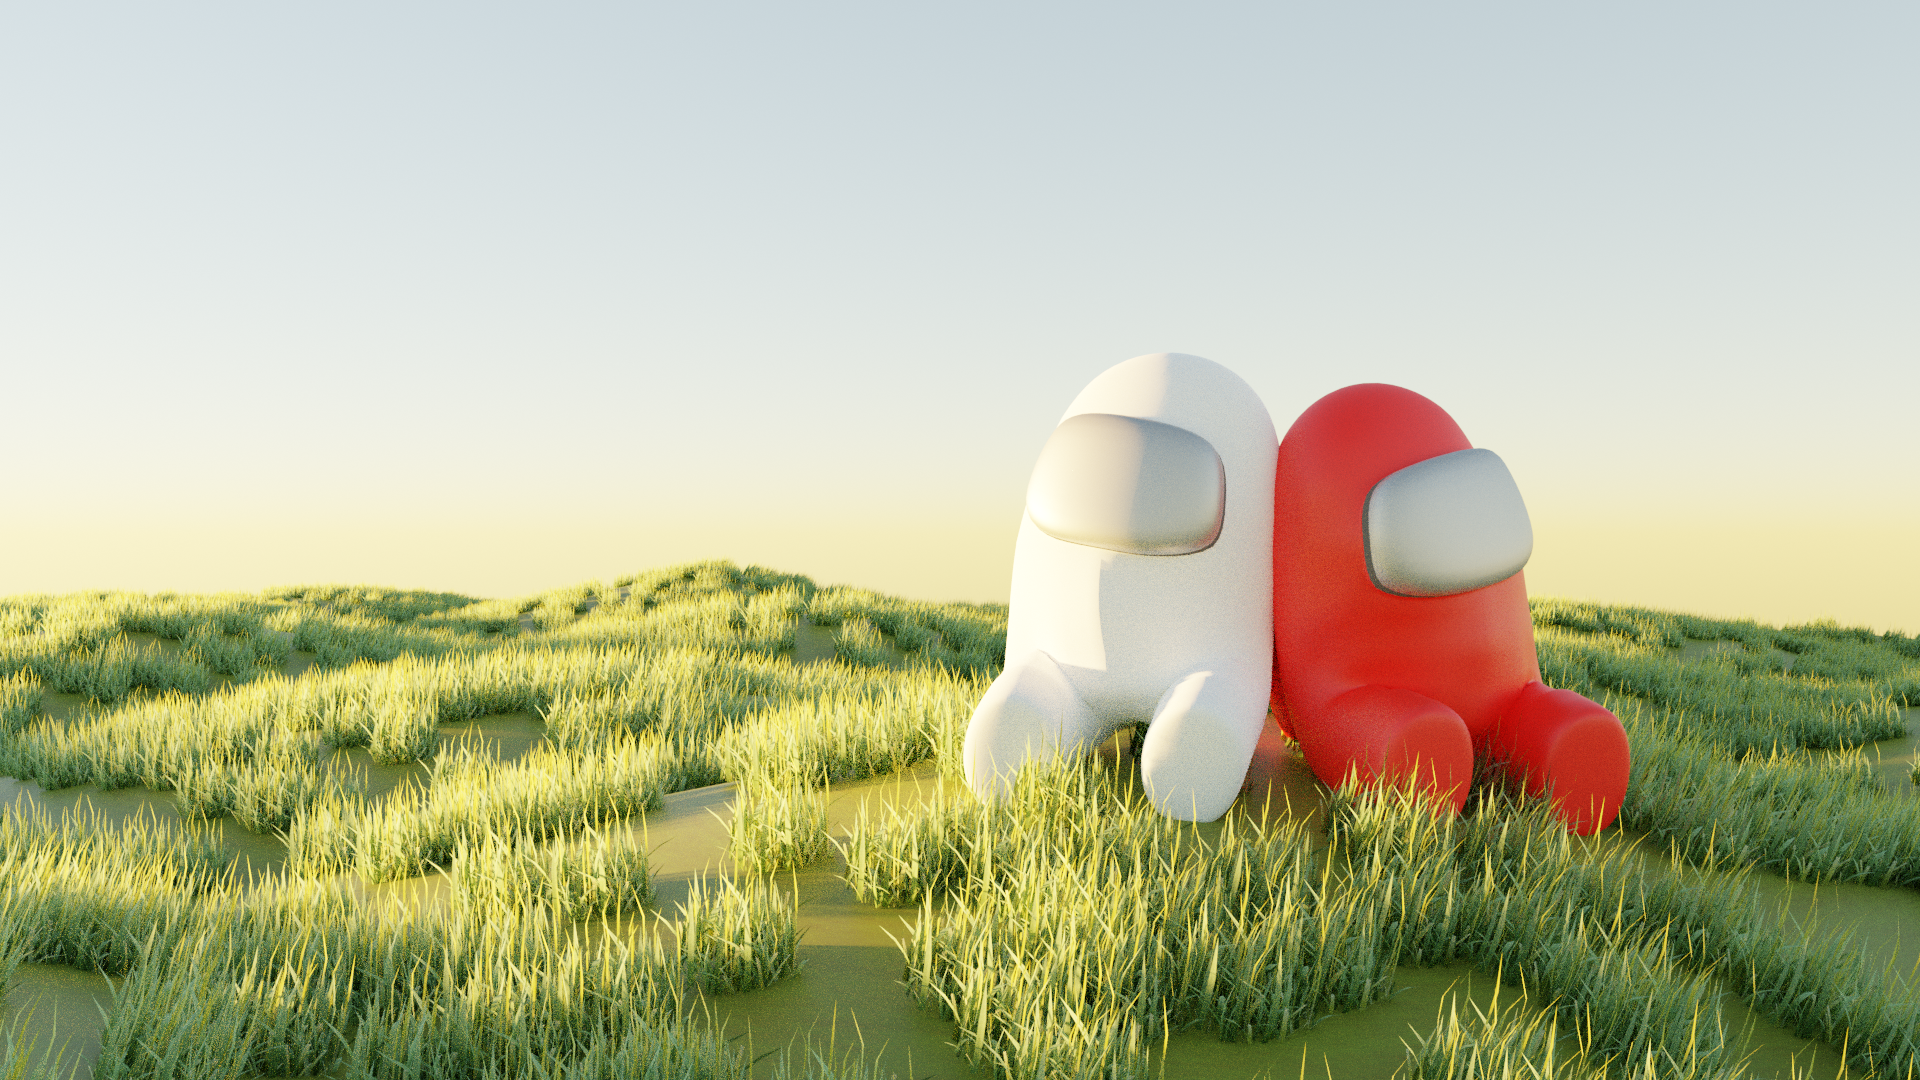 Among Us Landscape Game Characters Astronaut Video Game Characters Mobile Game 1920x1080